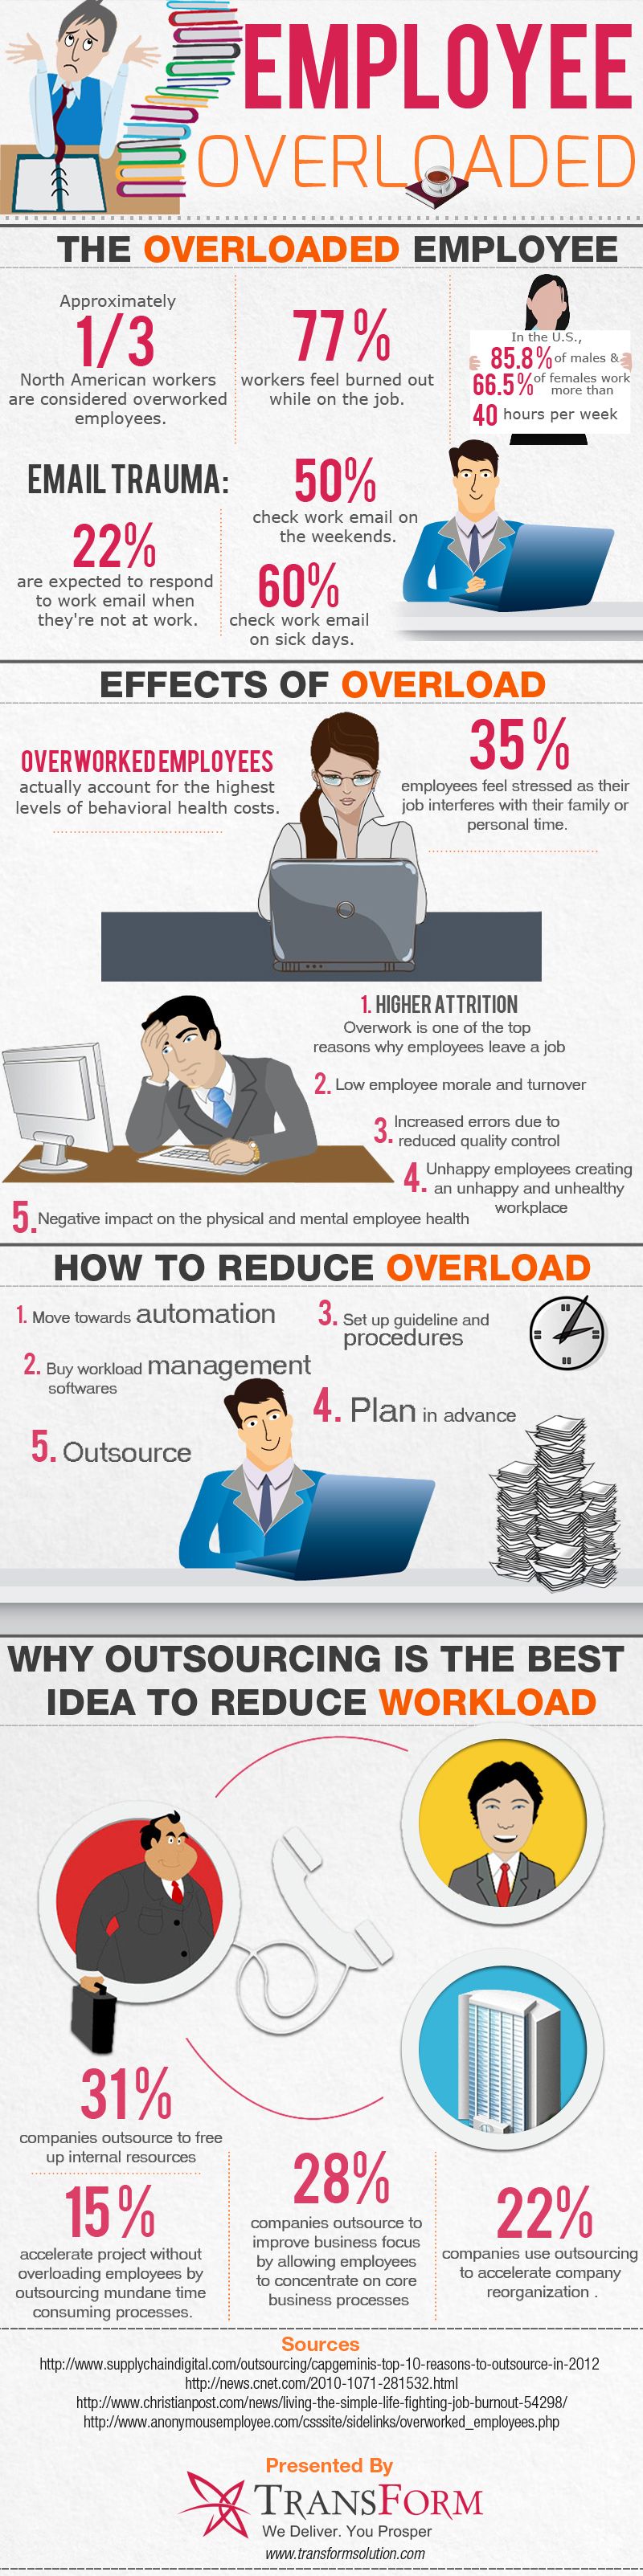 Overcome Employee Burnout by Outsourcing [Infographic]